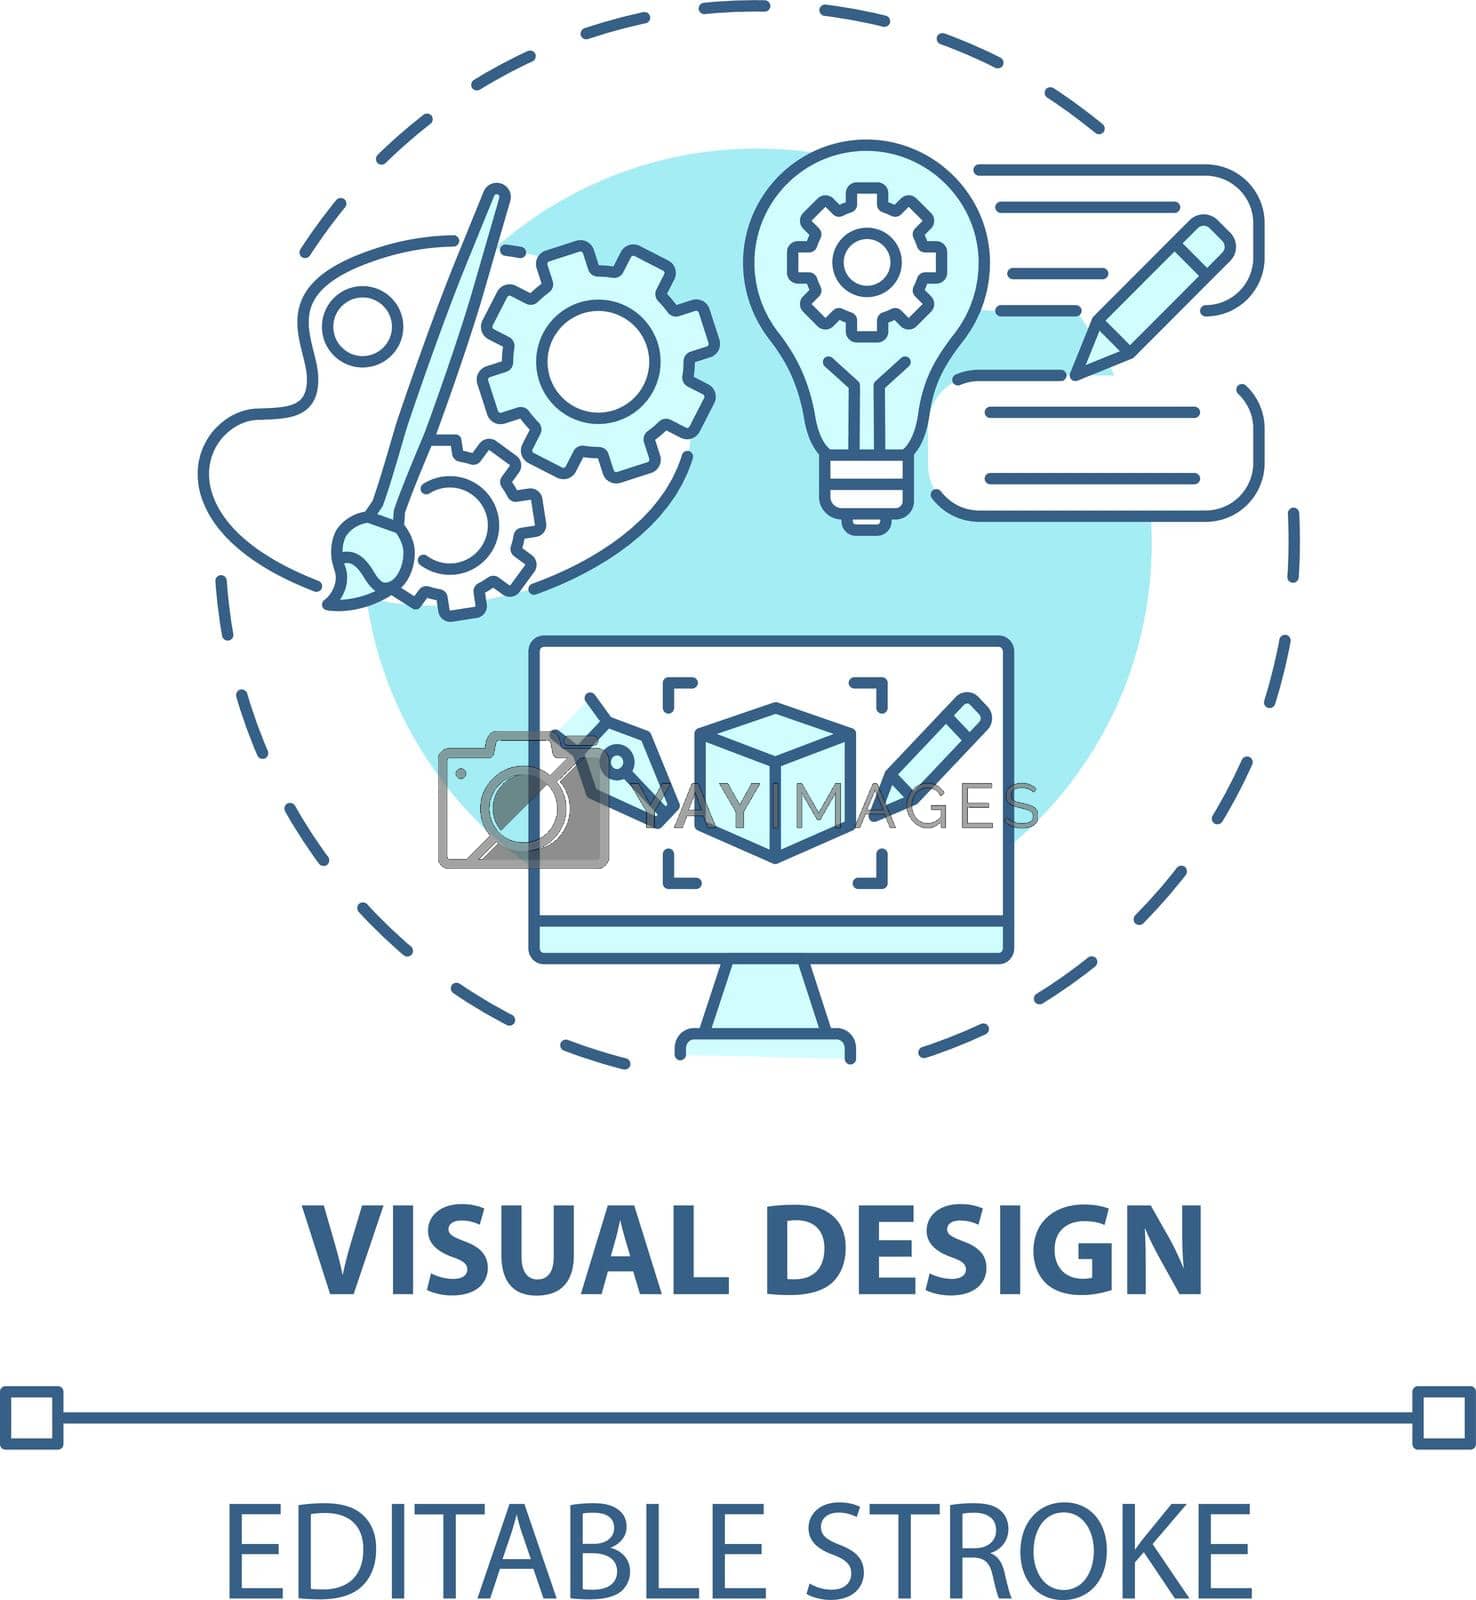 Visual design concept icon. UX design abstract idea thin line illustration. Visually appealing product. Creating attractive application. Vector isolated outline color drawing. Editable stroke